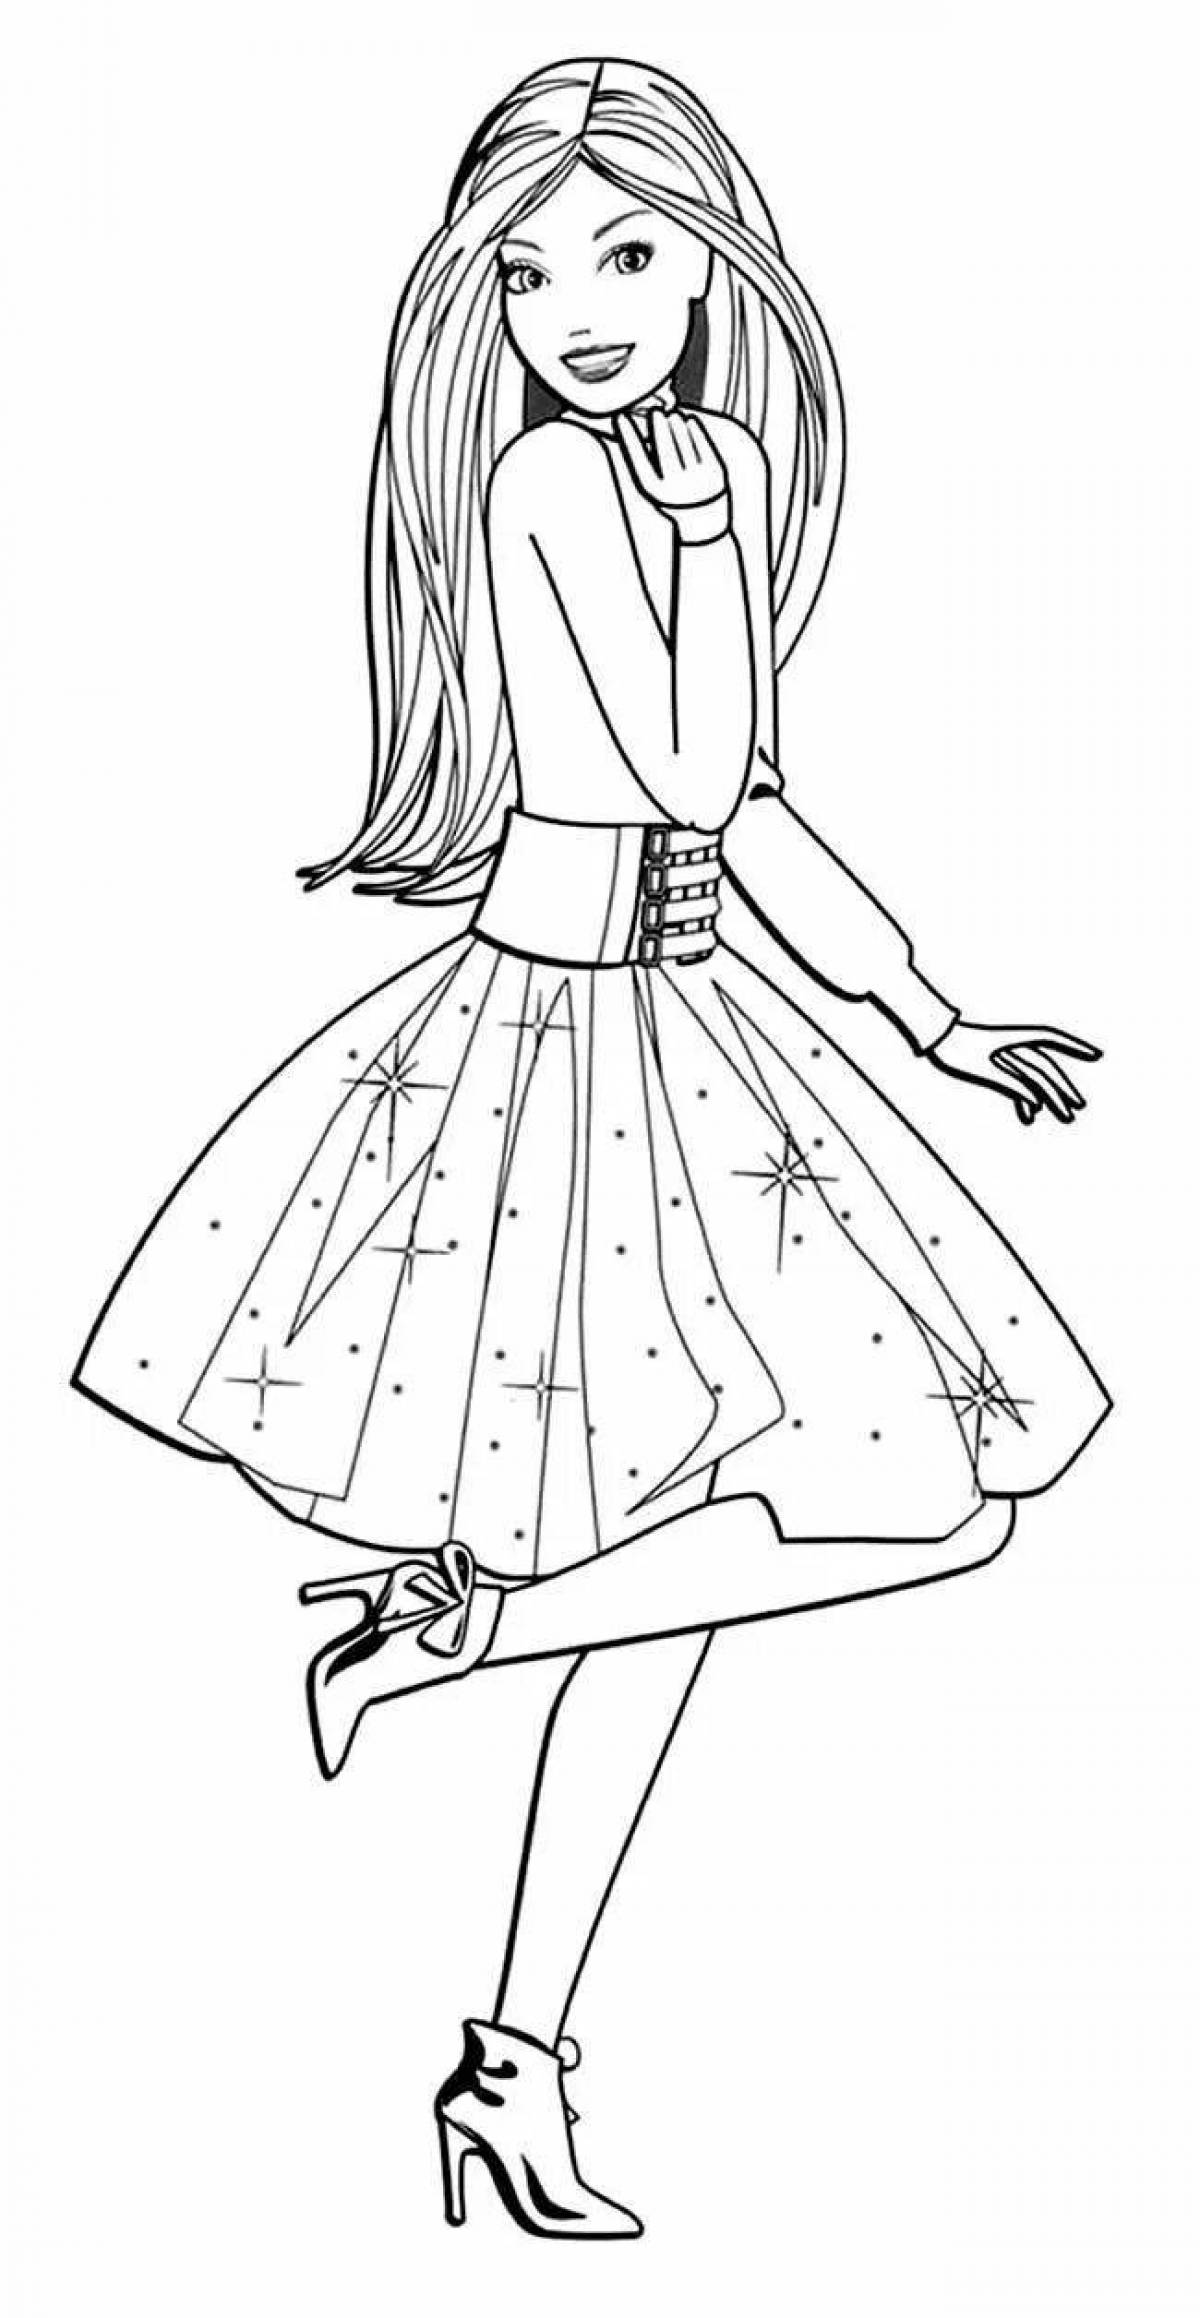 Coloring pages stylish girls are amazing